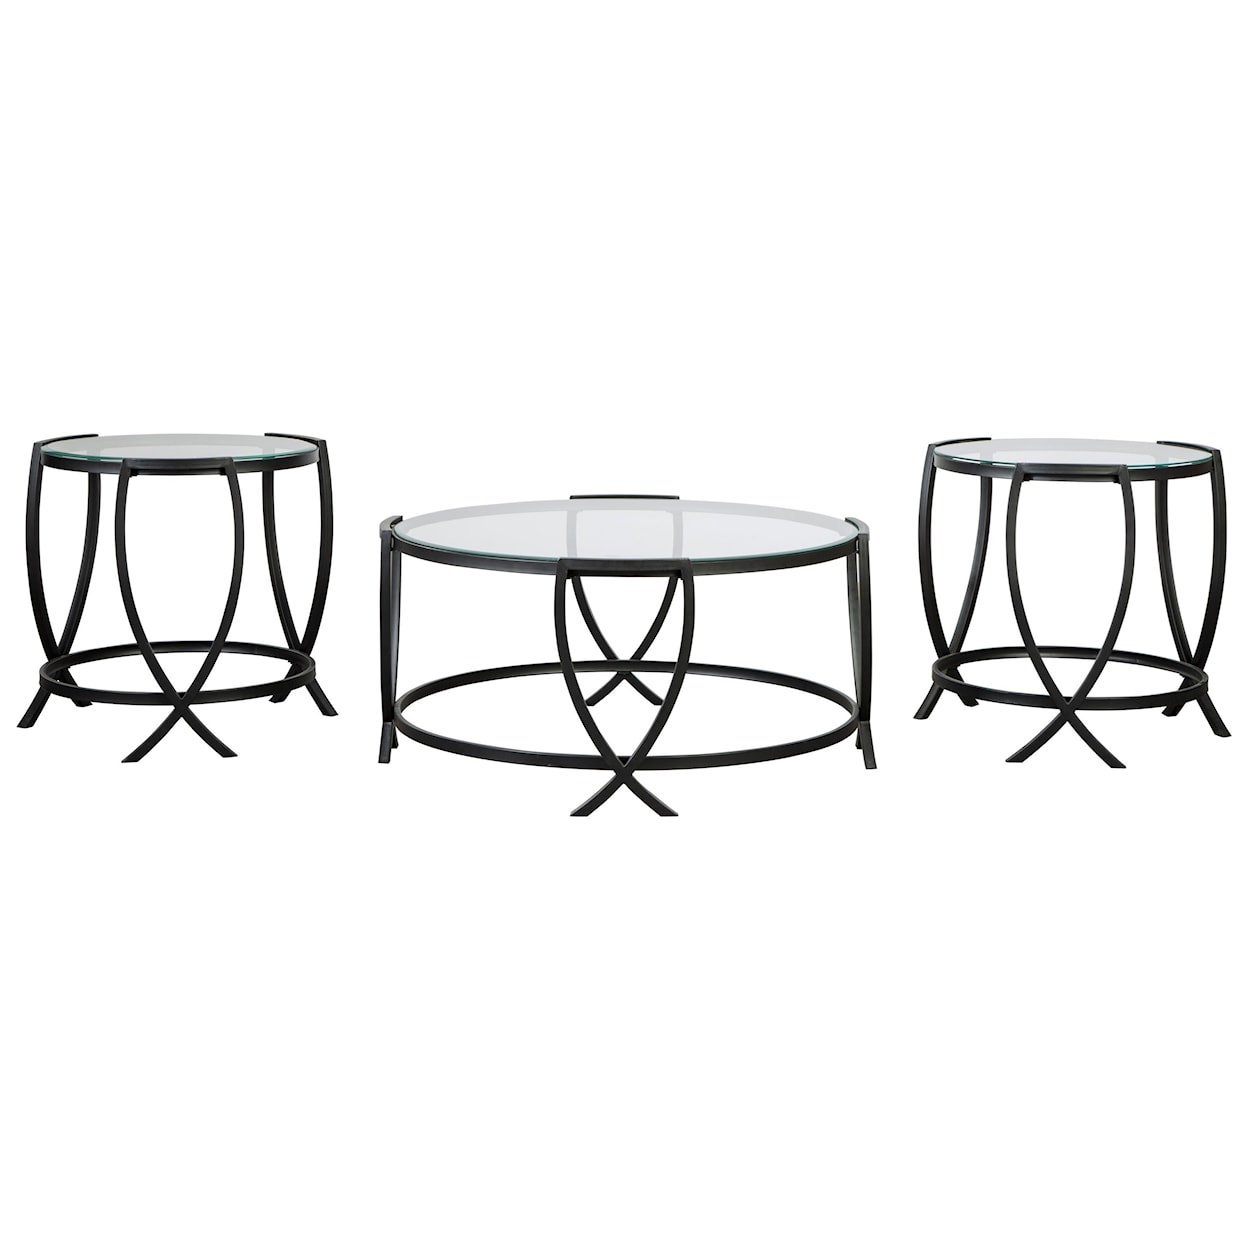 Benchcraft Tarrin Occasional Table Set